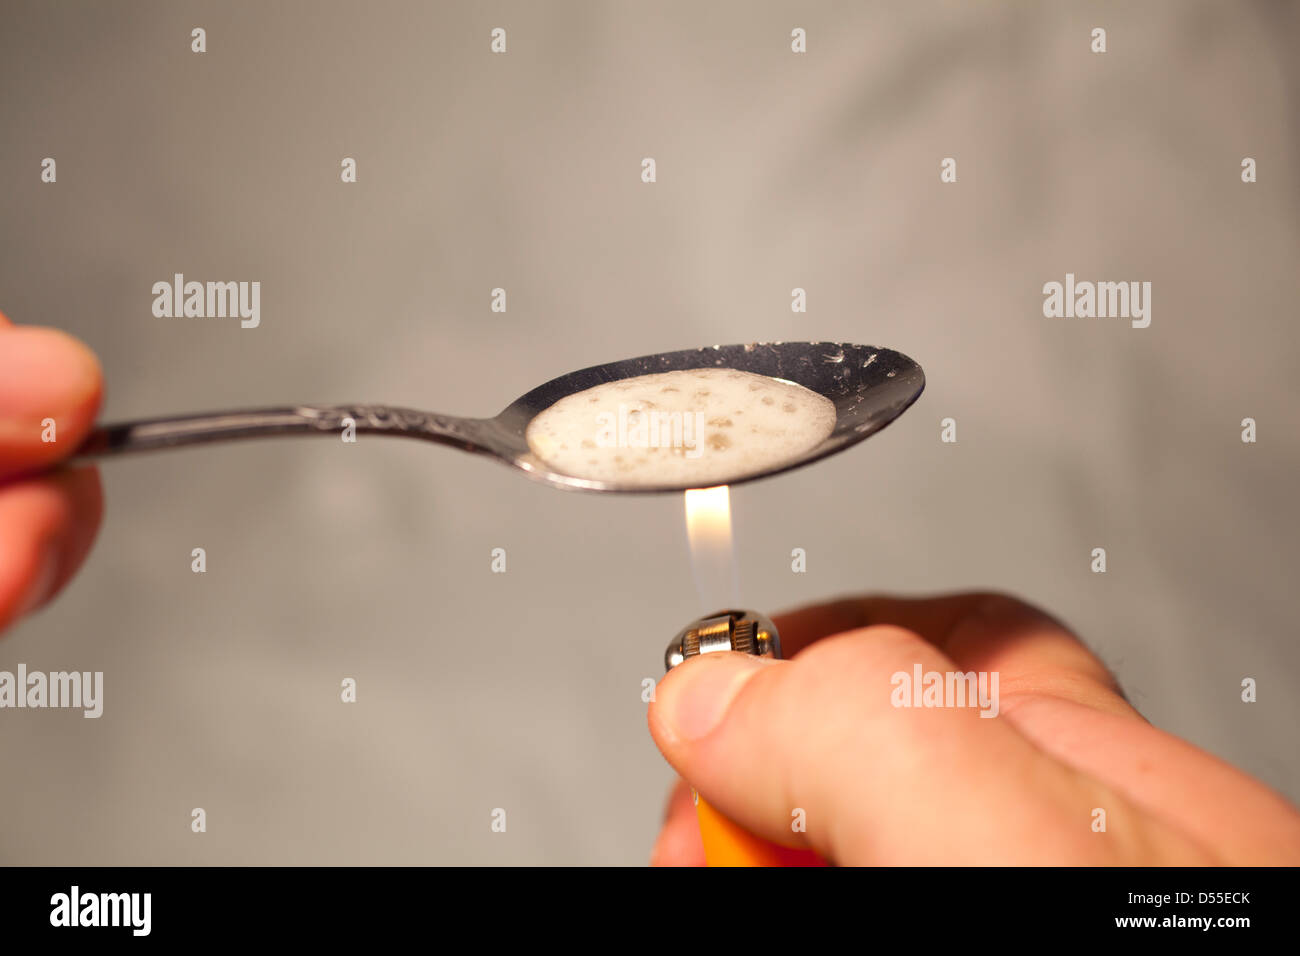 Cooking drugs in a spoon with a lighter Stock Photo